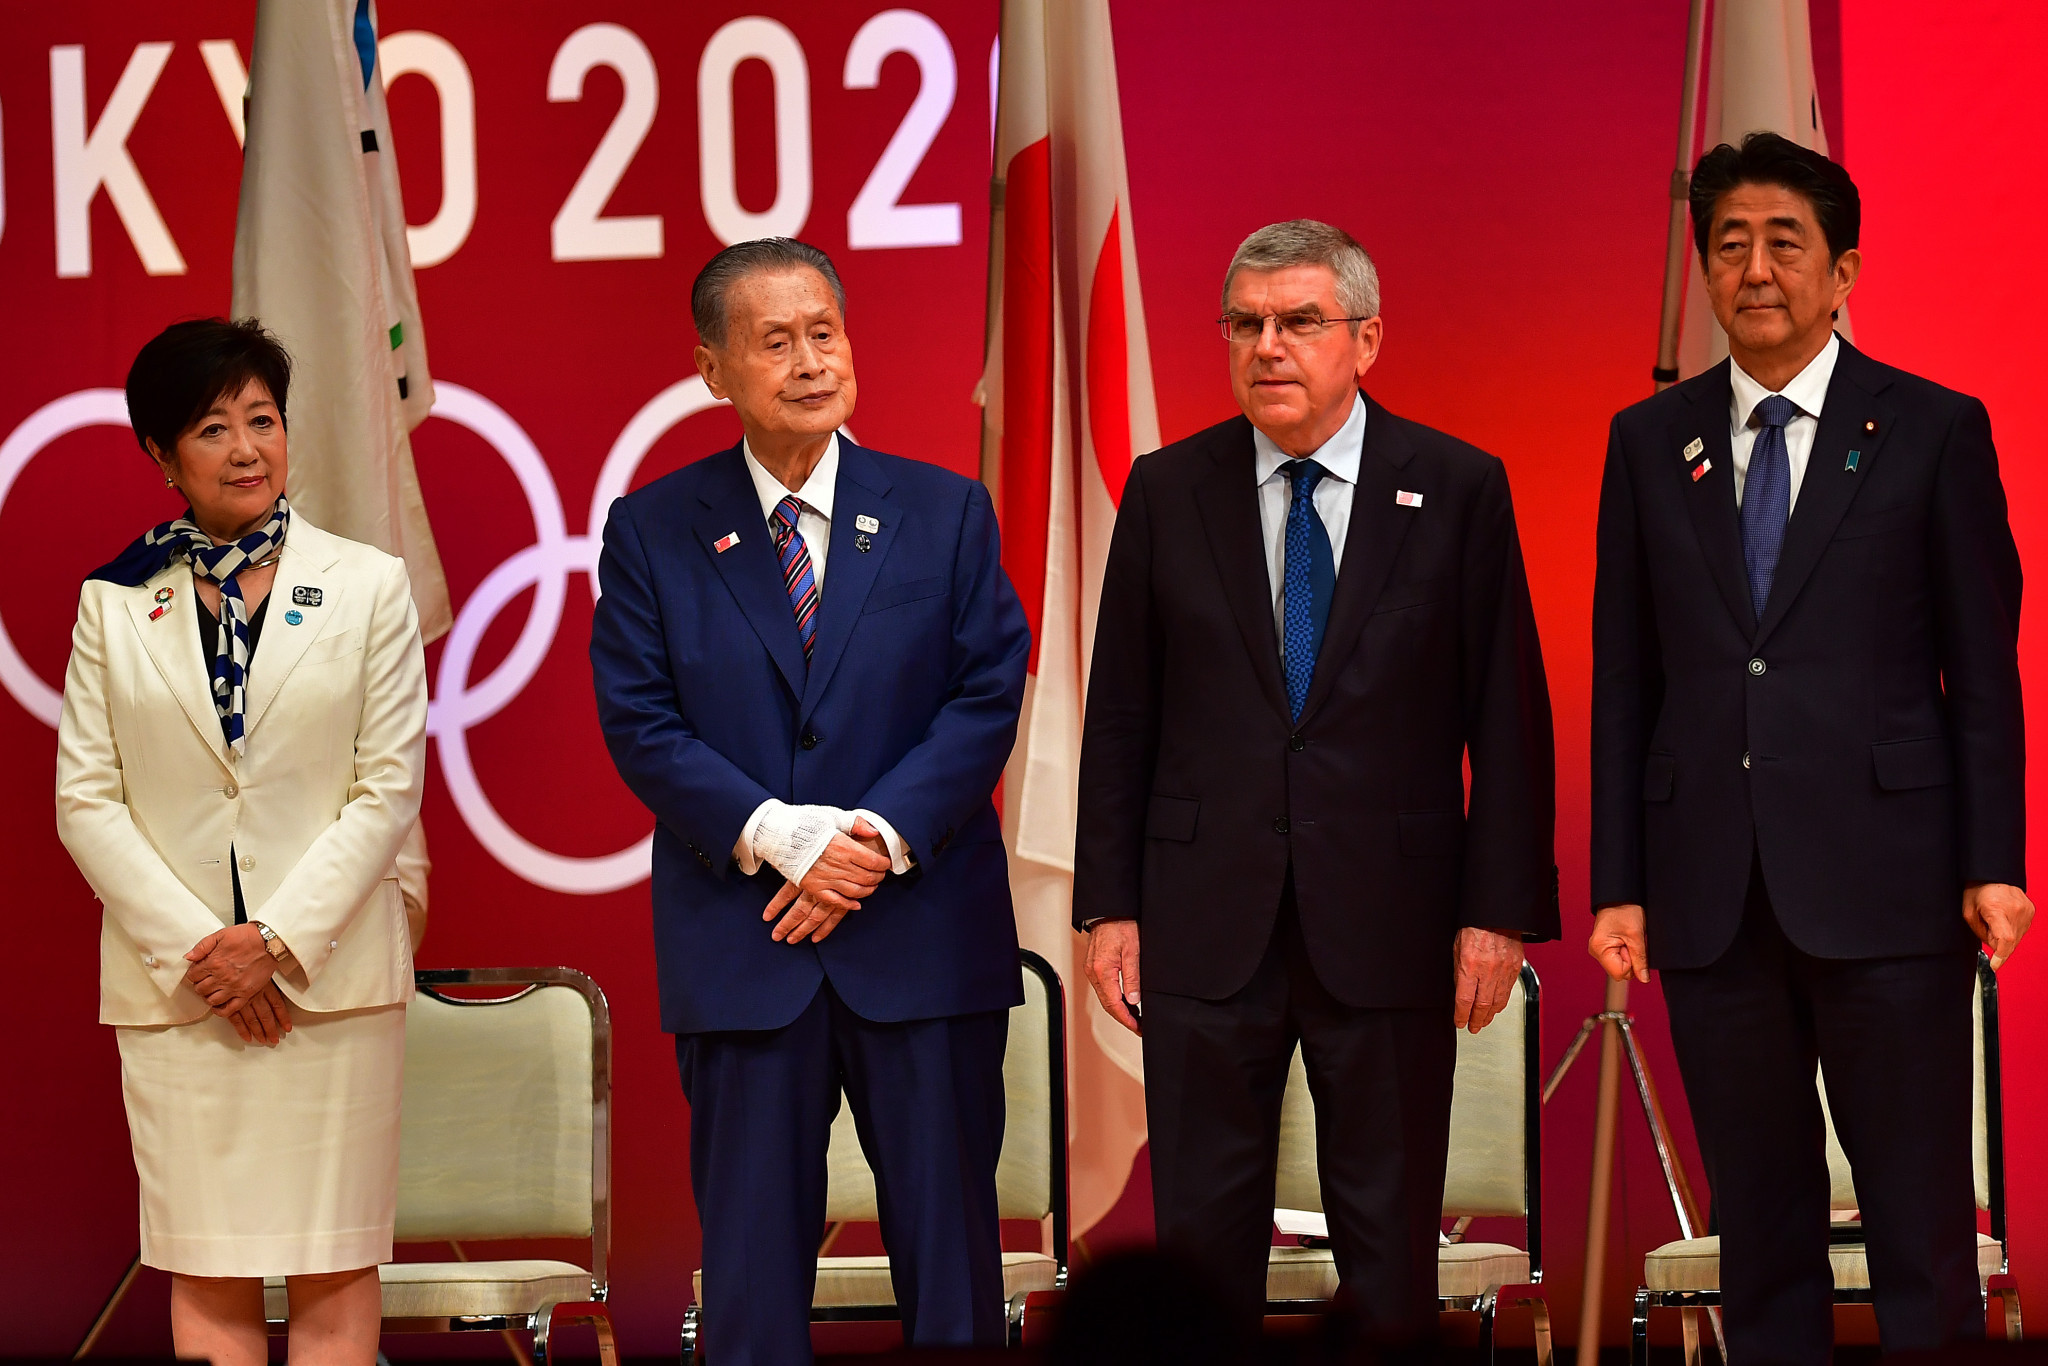 Koike, left, was joined by the likes of Tokyo 2020 President Yoshirō Mori, IOC counterpart Thomas Bach and Japan's Prime Minister Shinzō Abe ©Getty Images